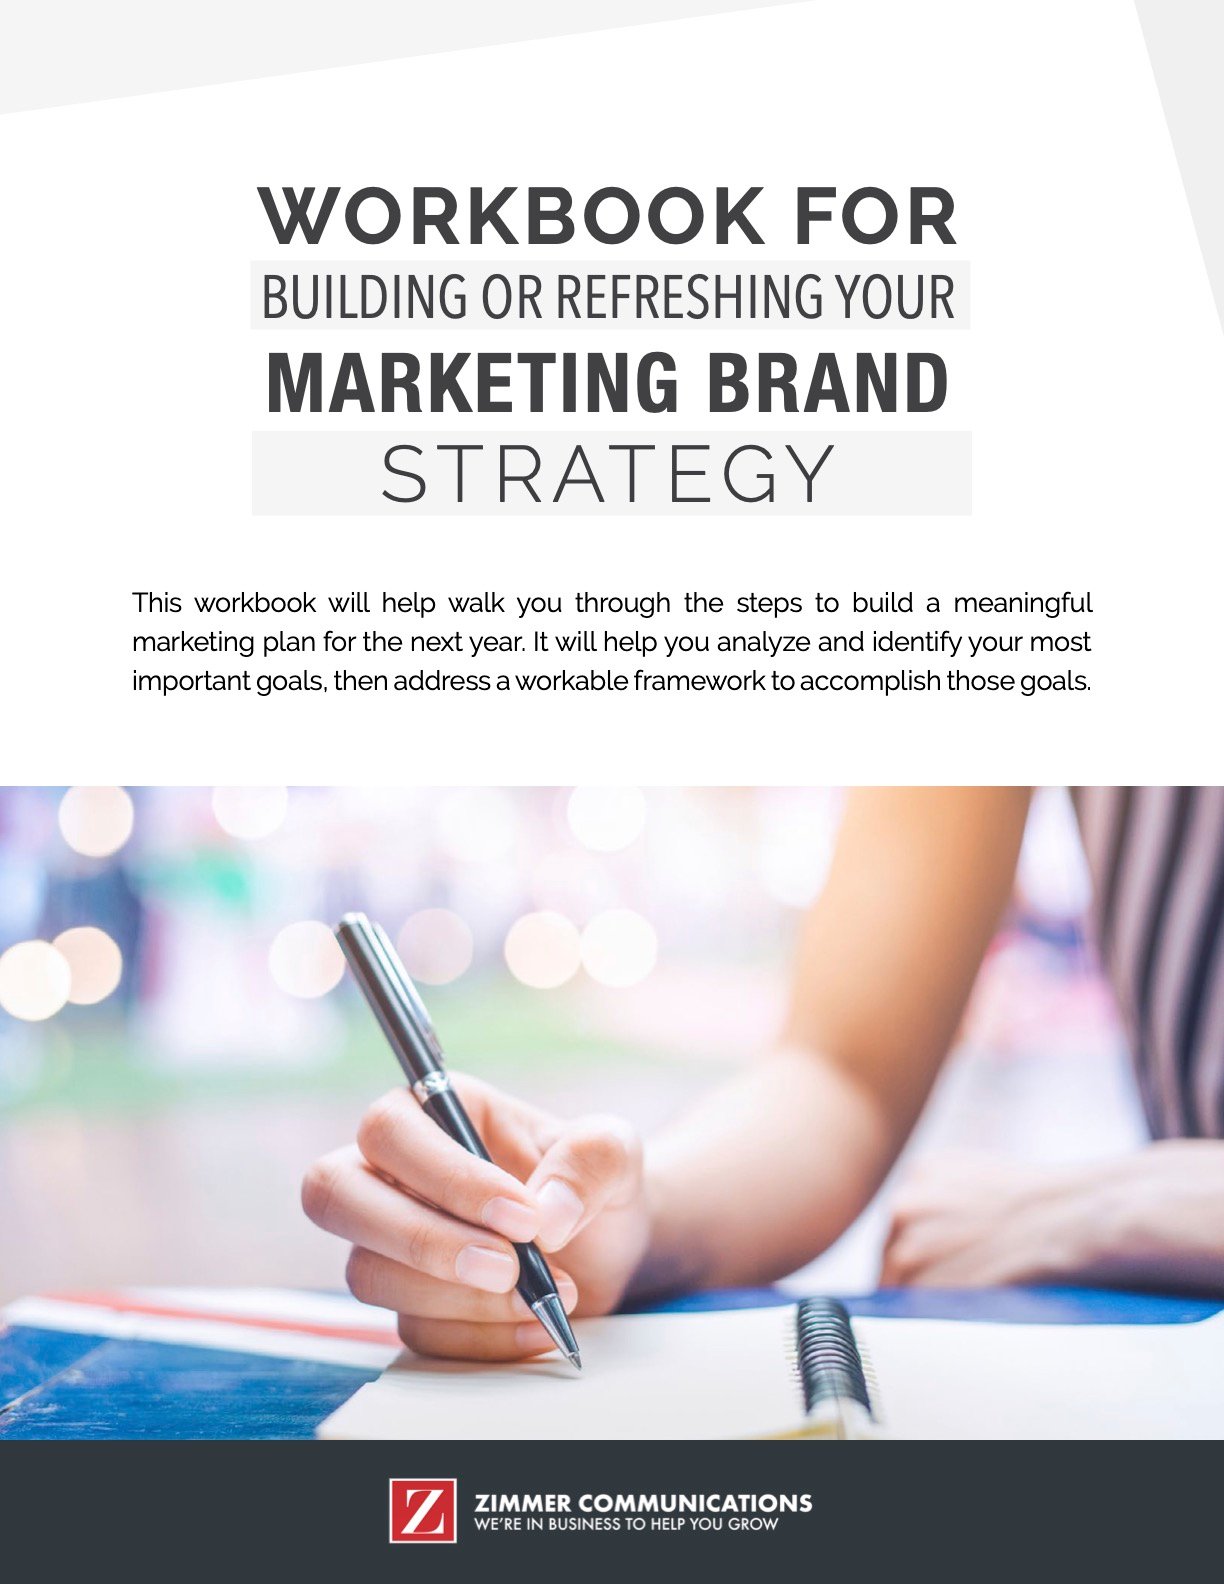 Workbook for Building or Refreshing Your Marketing Brand StrategyBuilding or Refreshing Your Brand Strategy Workbook This workbook will help walk you through the steps to build a meaningful marketing plan for the next year. It will help you analyze and identify your most important goals and accomplish those goals.  Download here.